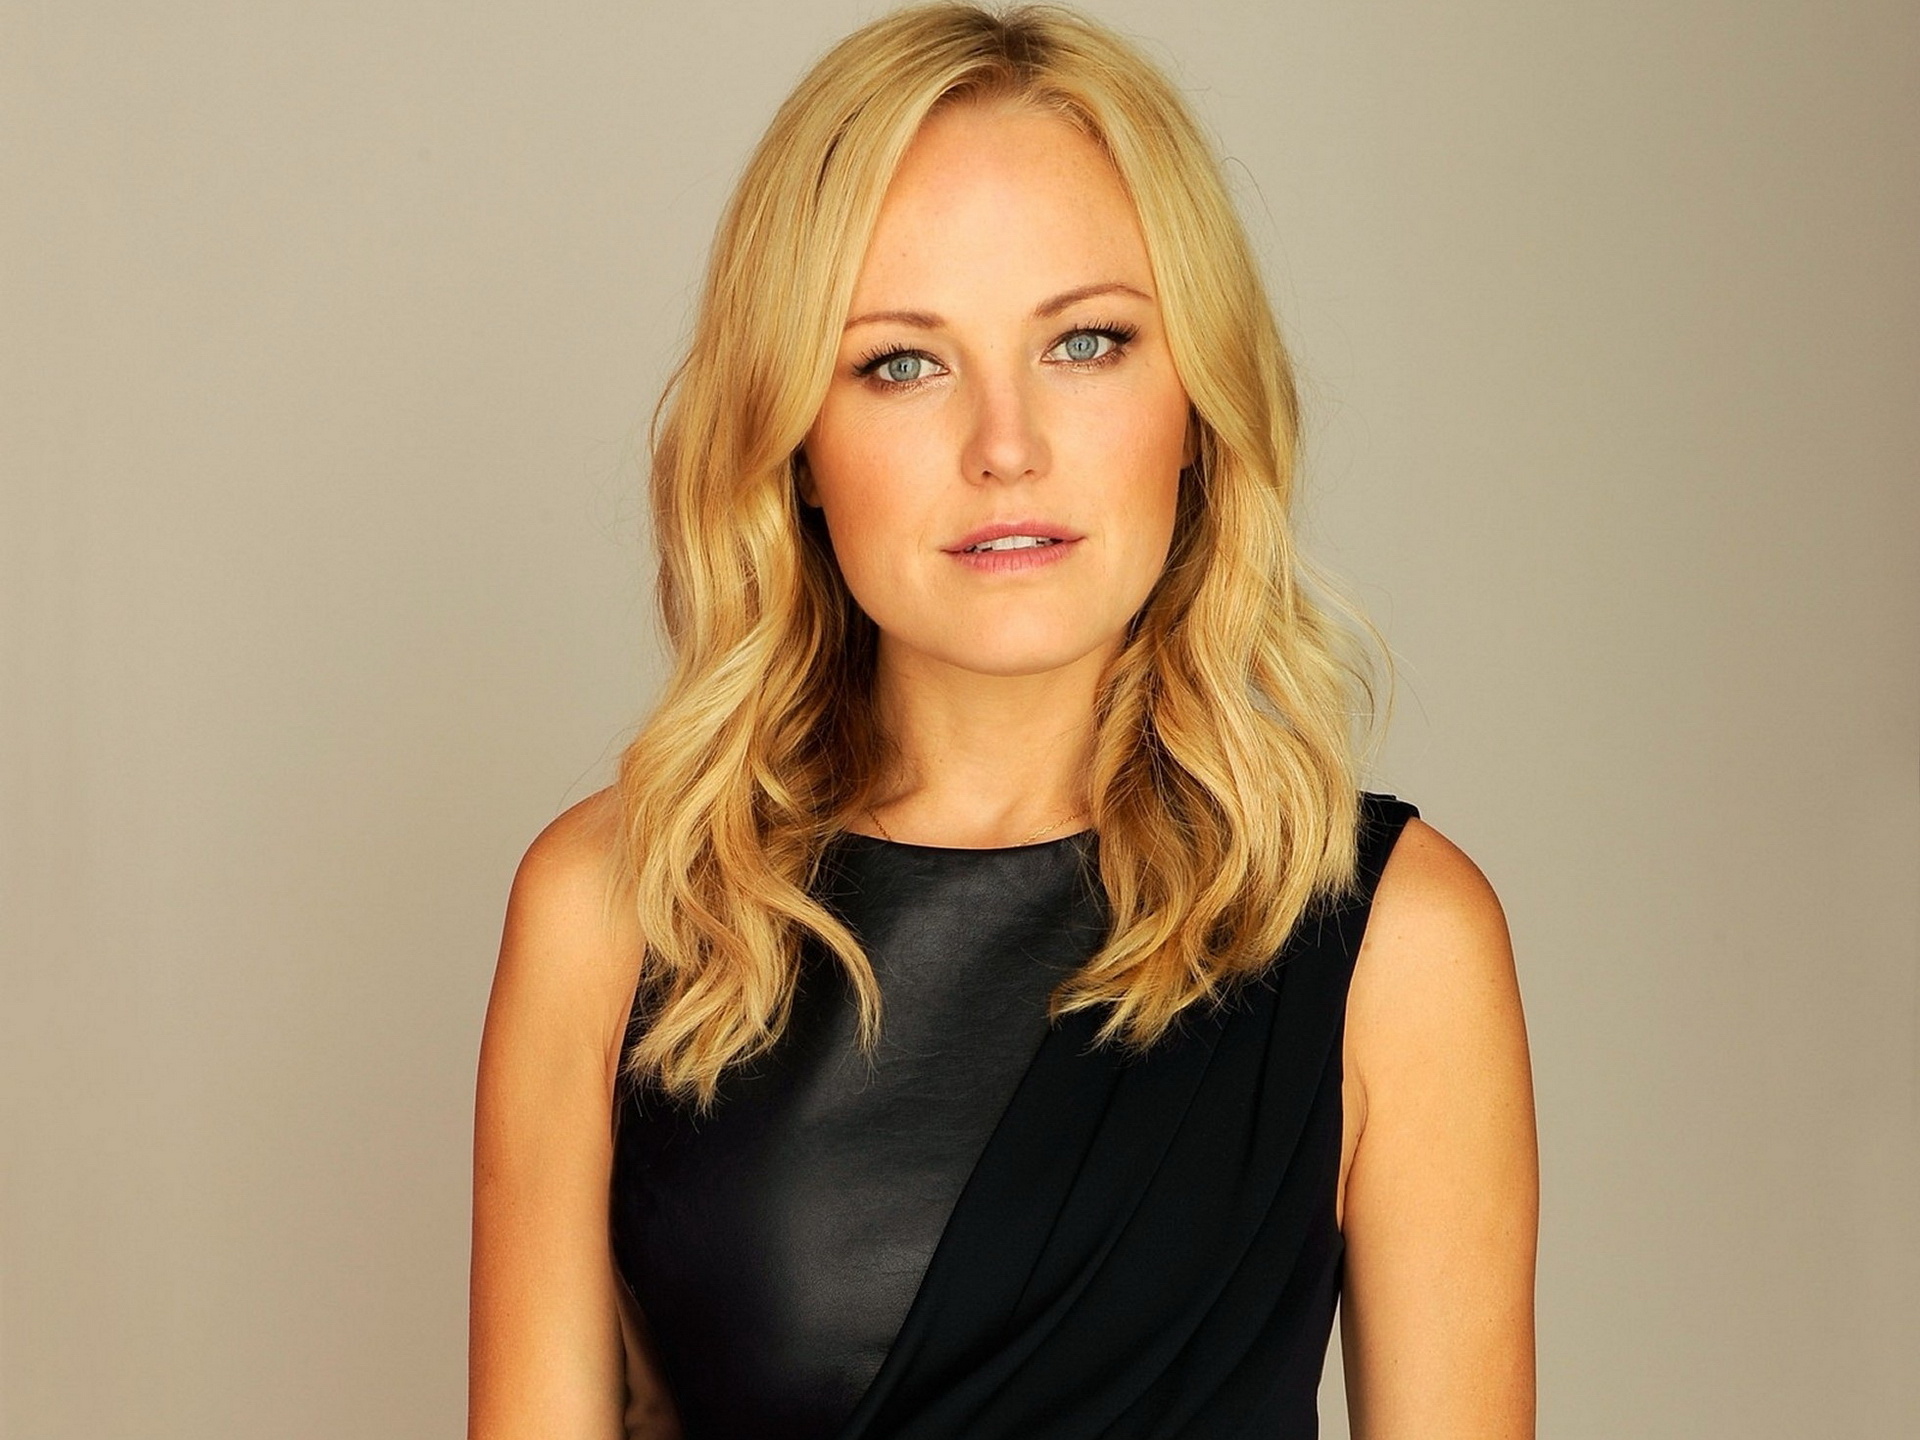 Malin Akerman: Played a supporting role in the romantic comedy film The Romantics. 1920x1440 HD Background.